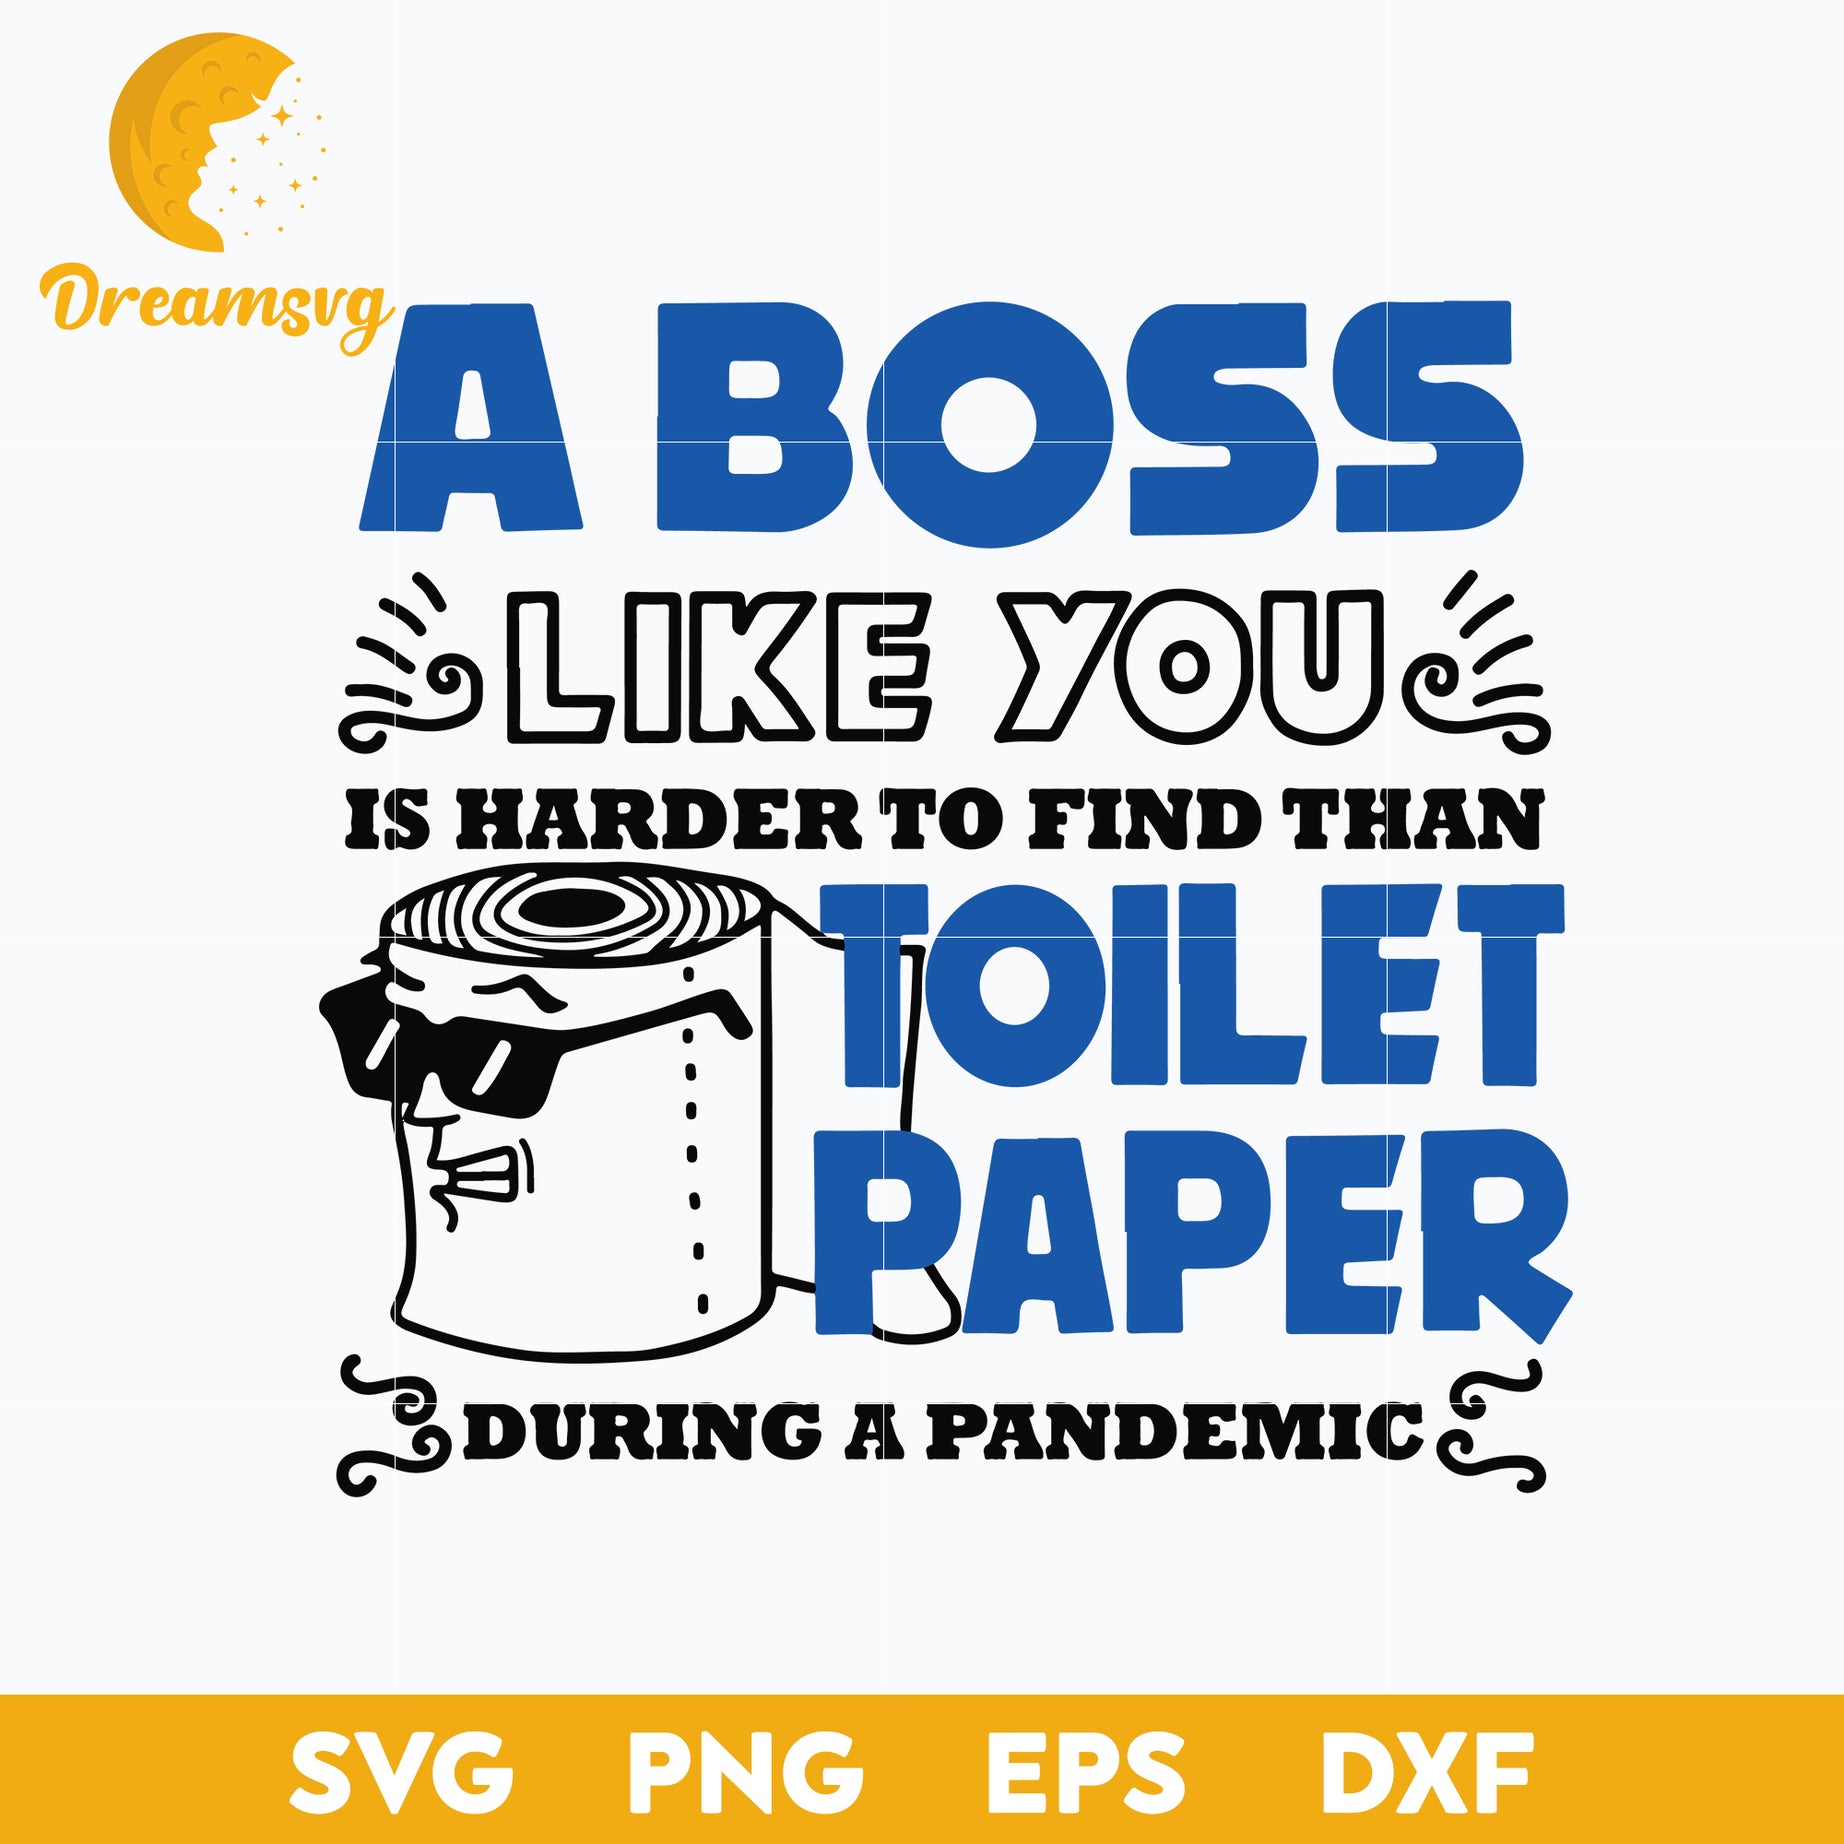 A Boss Like You Is Harder Find Than Toilet Paper During A Pandemic Boss Svg, Funny Svg, png, dxf, eps digital file.